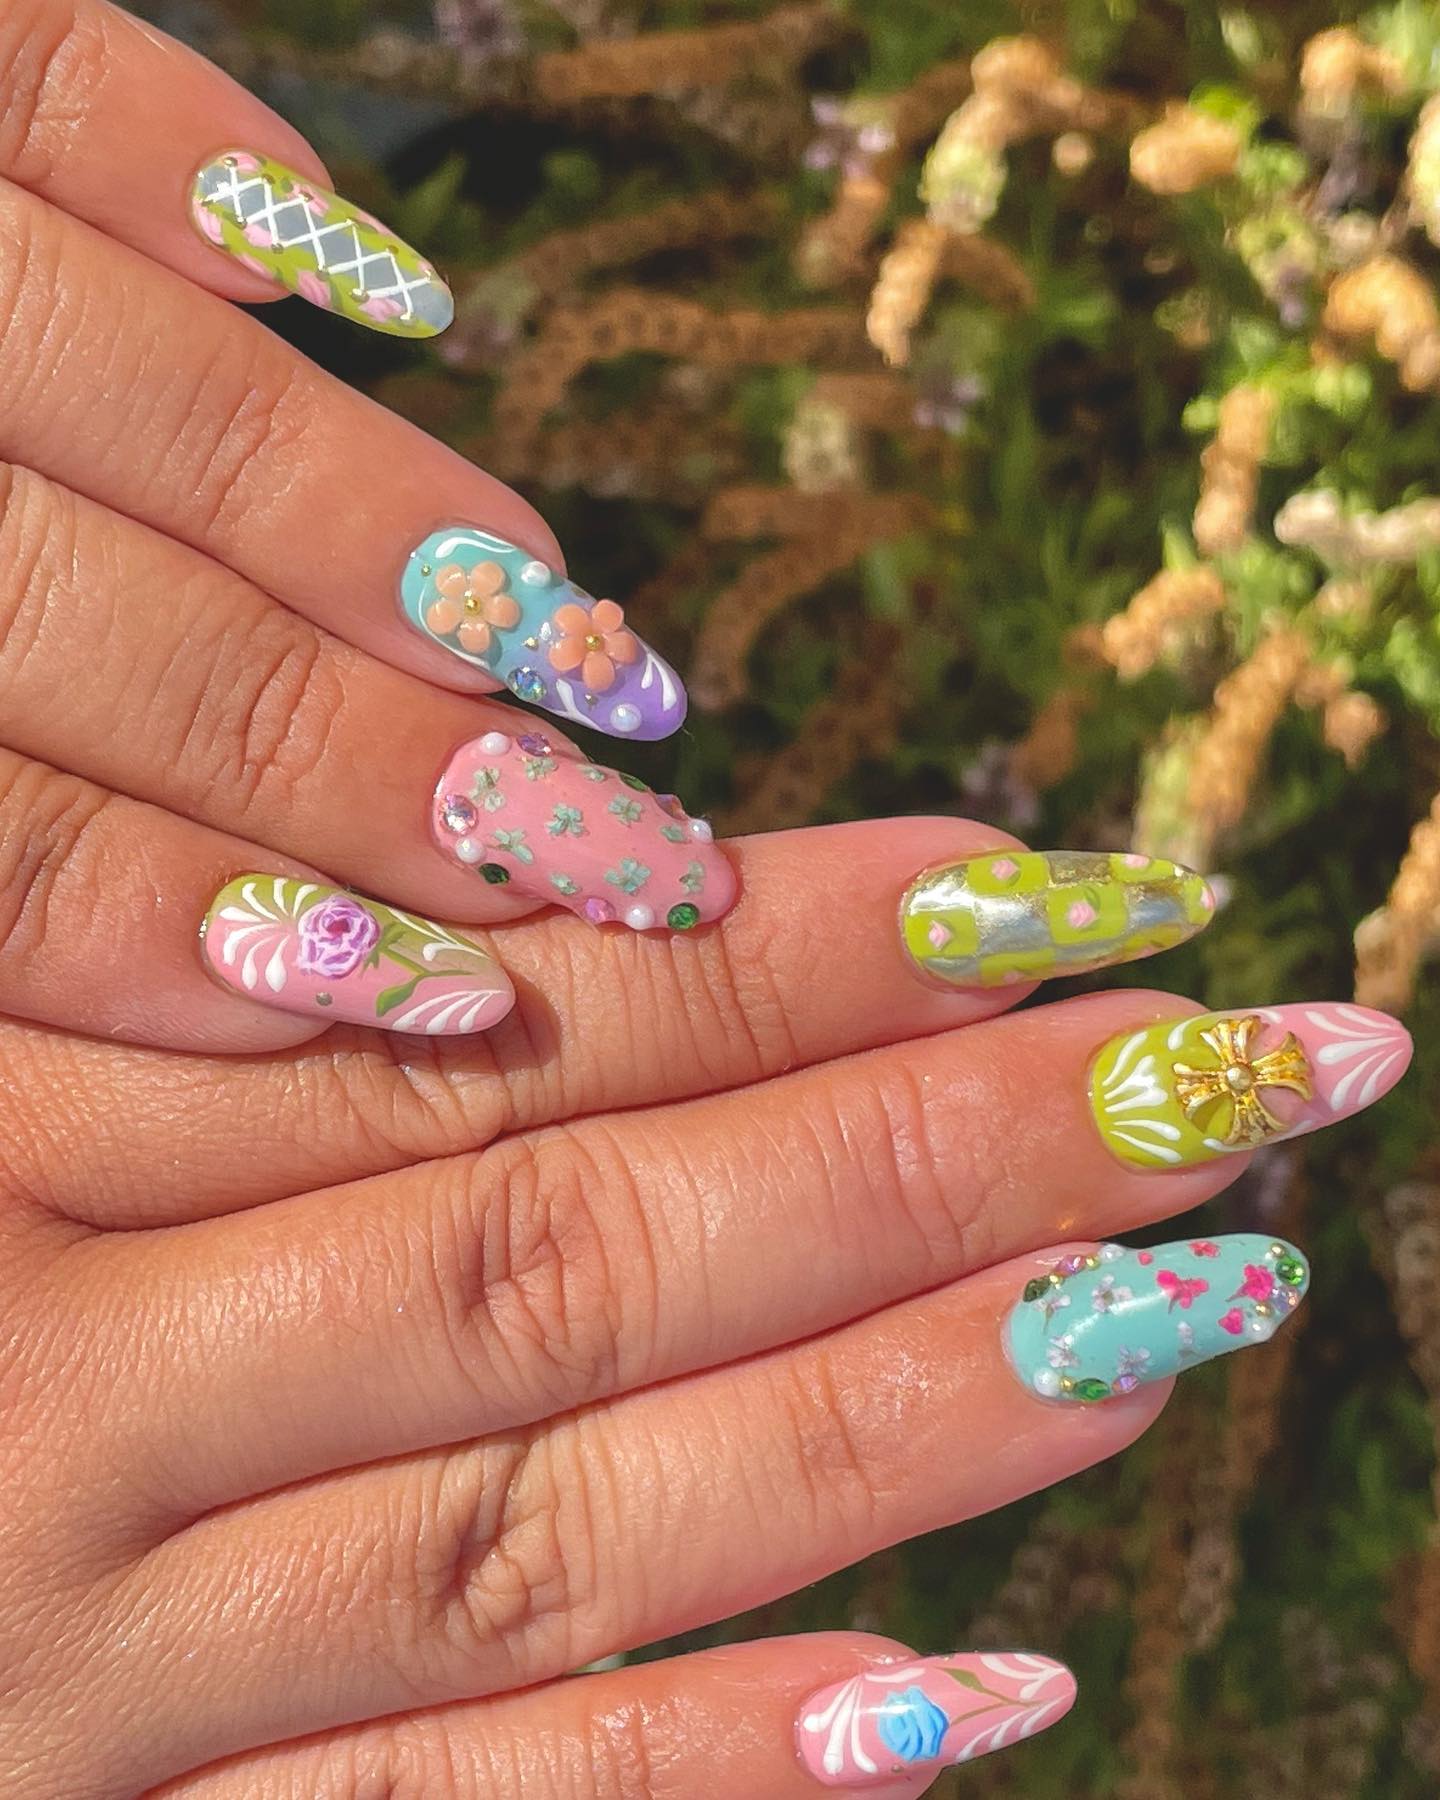 Stunning Whimsical Nails With Garden Vibes